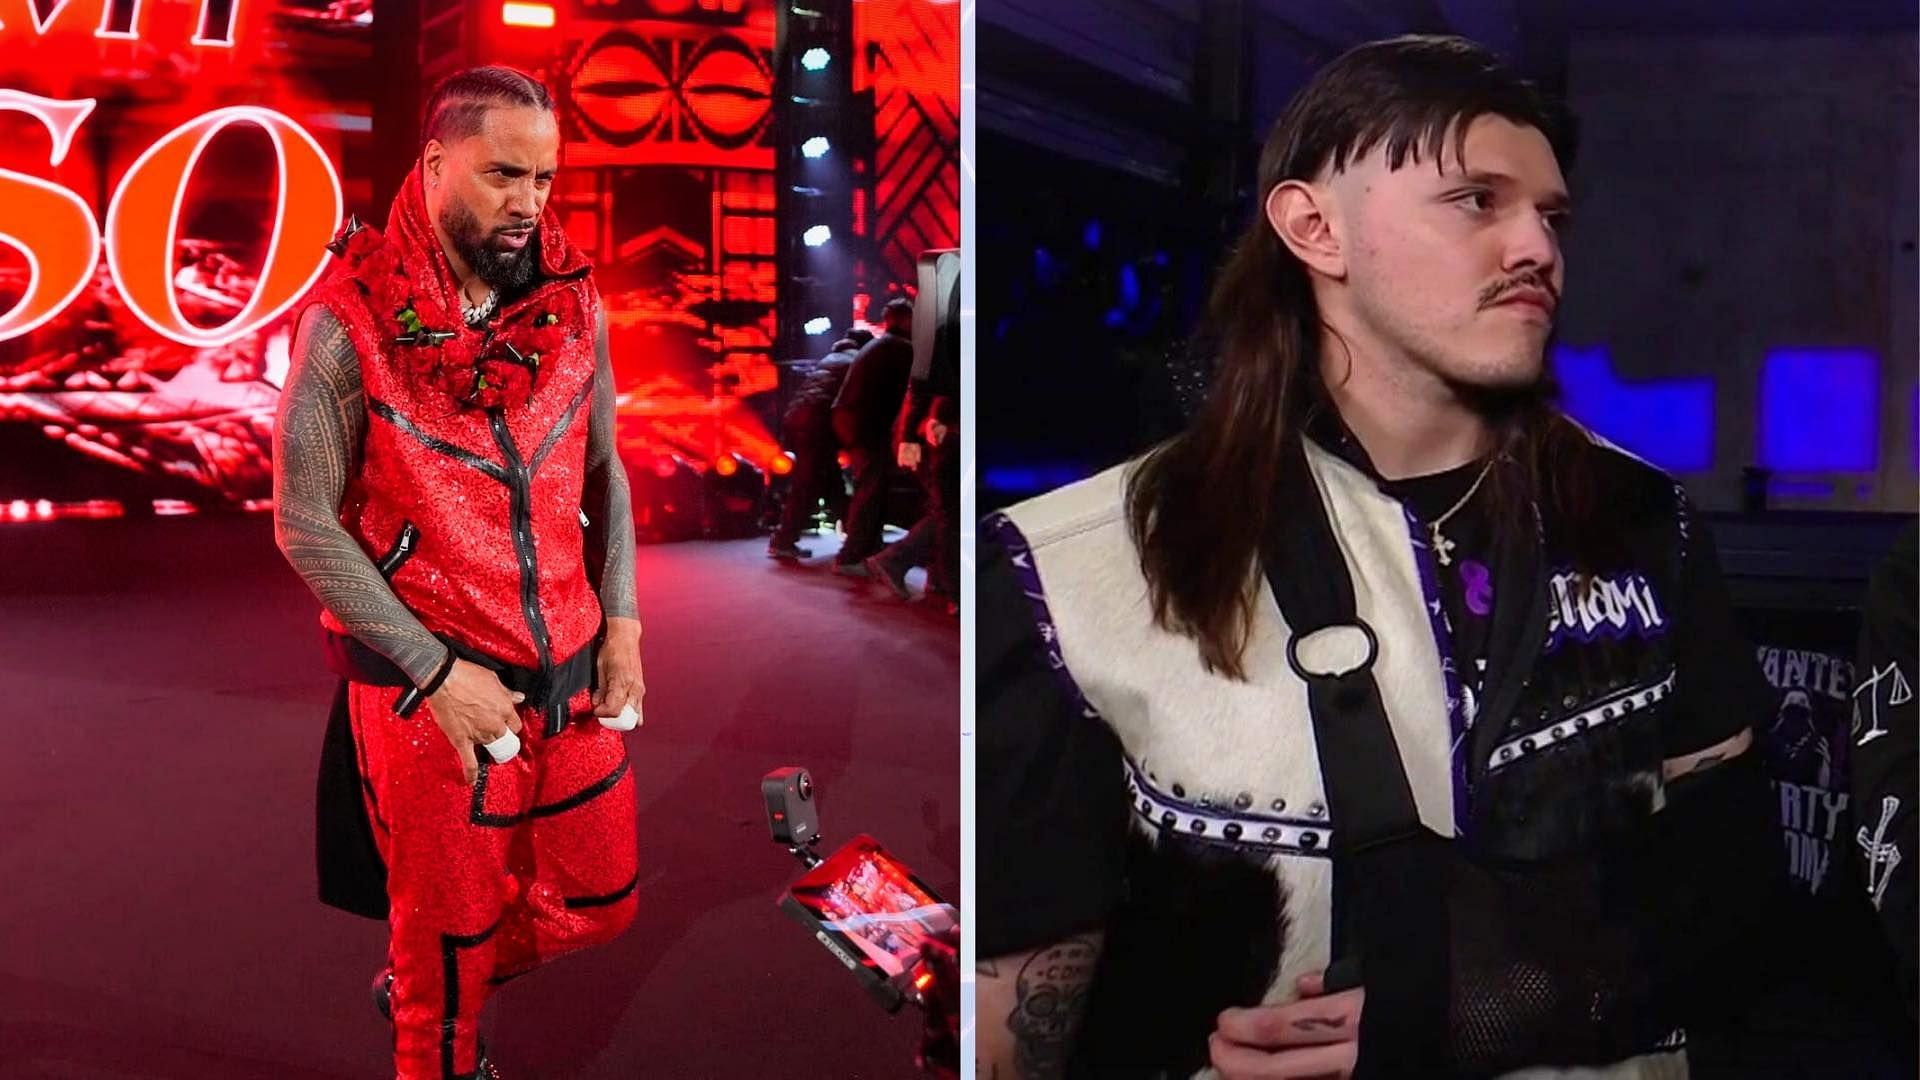 Jimmy Uso is off TV, while Dominik Mysterio still appears on RAW.